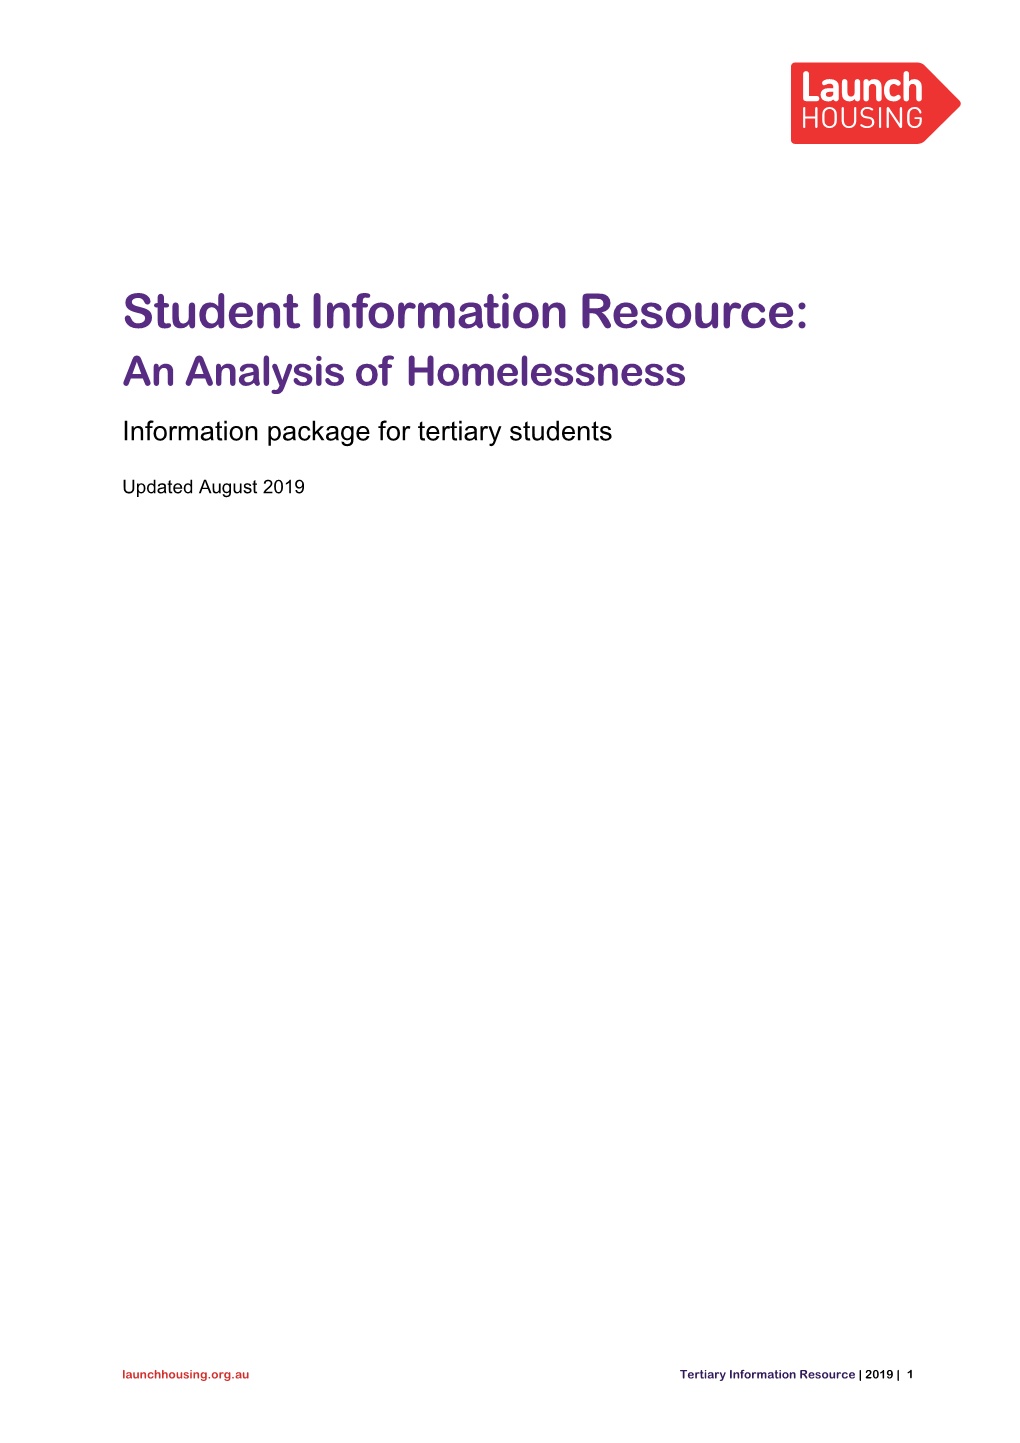 Student Information Resource: an Analysis of Homelessness Information Package for Tertiary Students